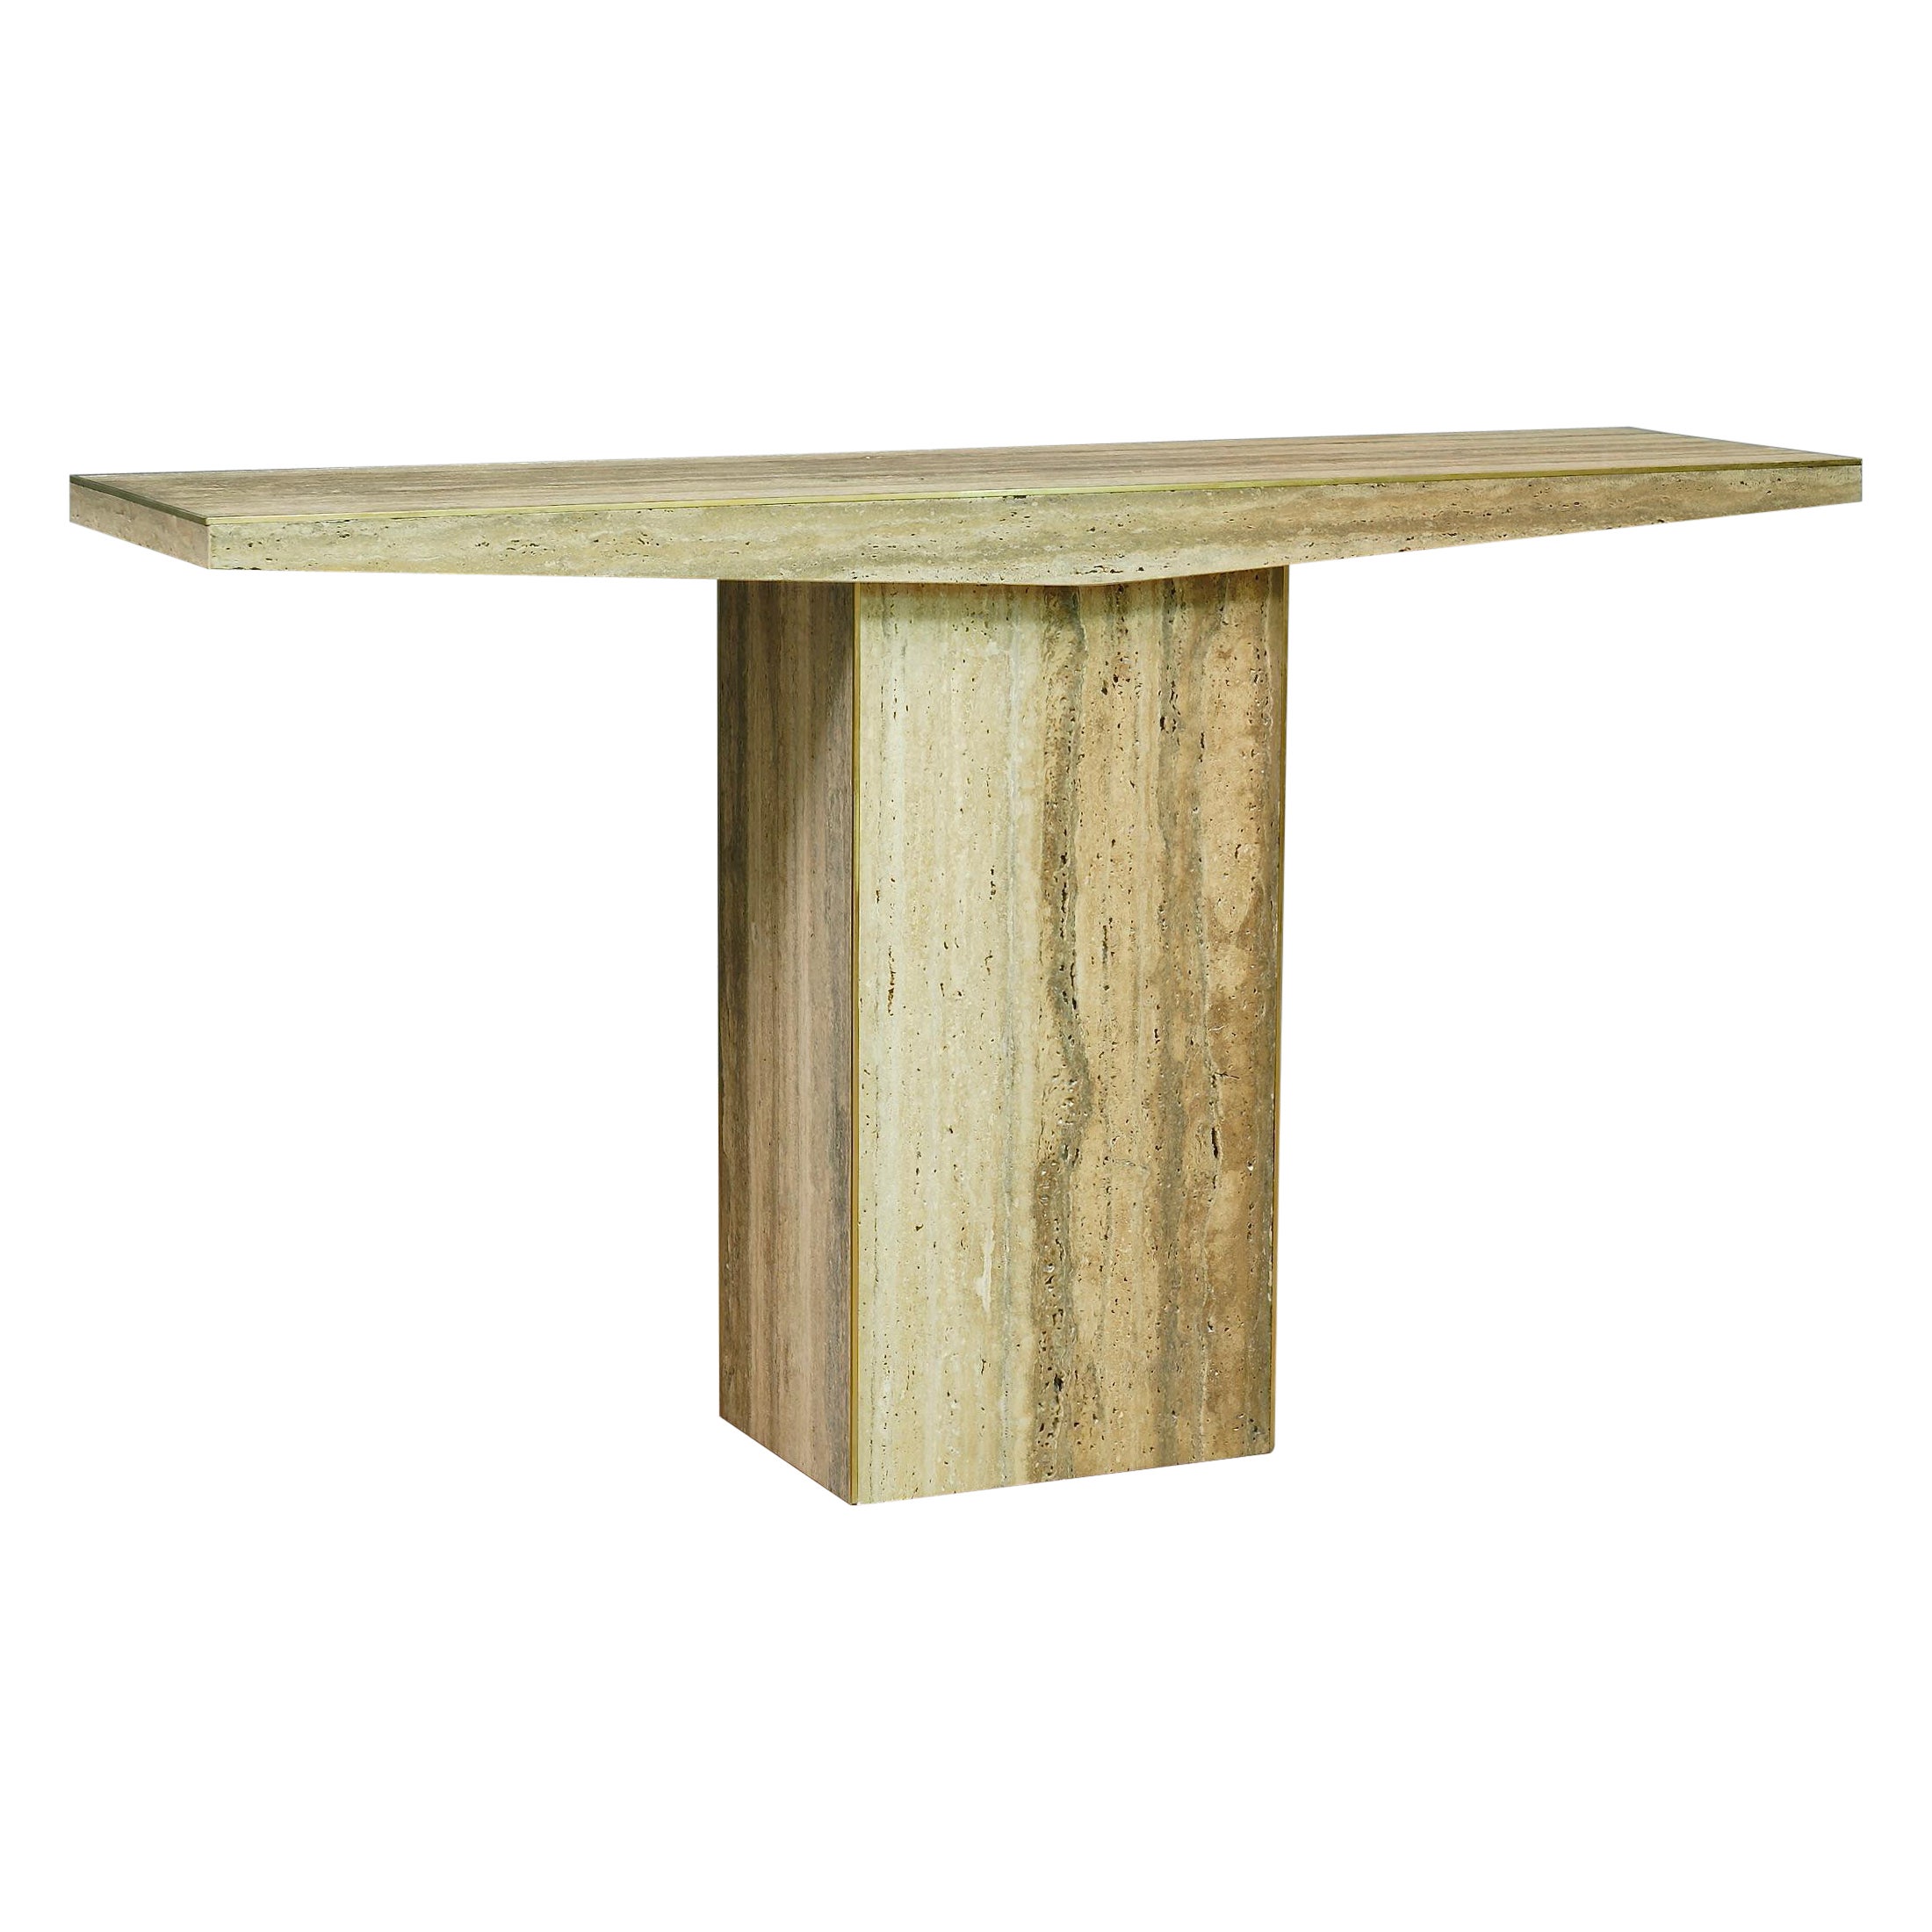 MidCentury Squared Travertine and Brass Console Table, 2020 For Sale